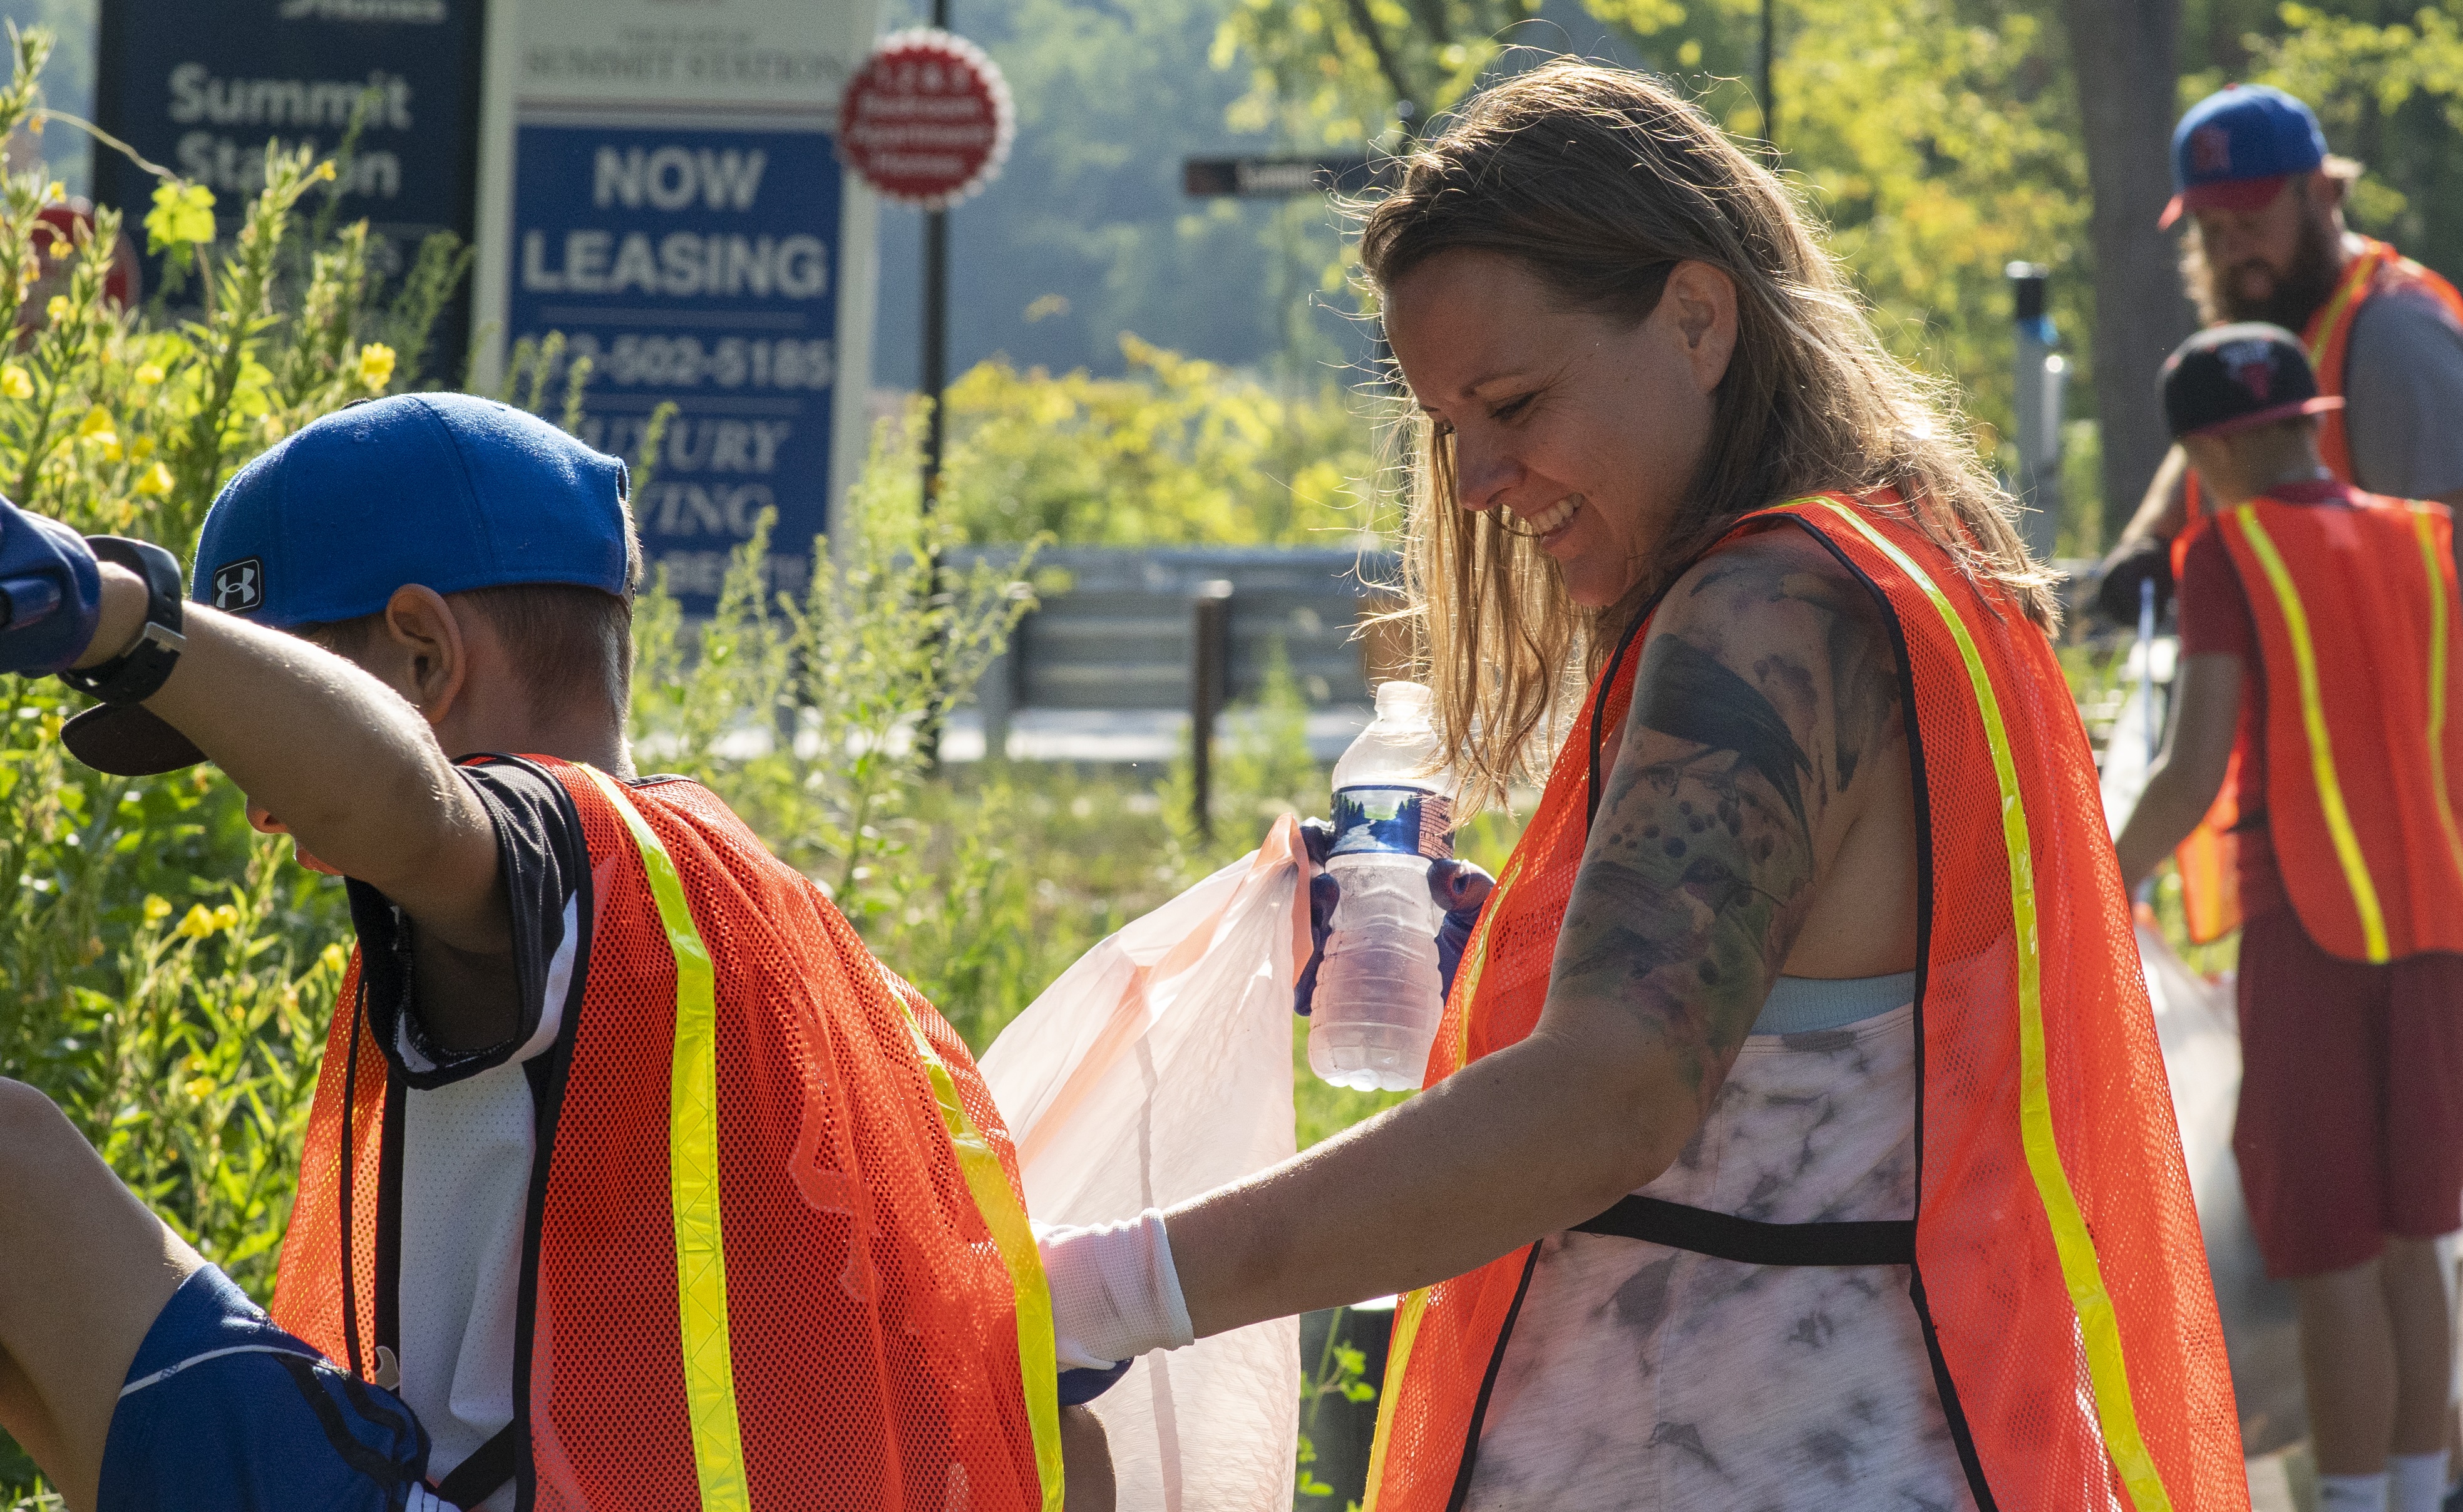 A family helping to clean up litter along a county roadway